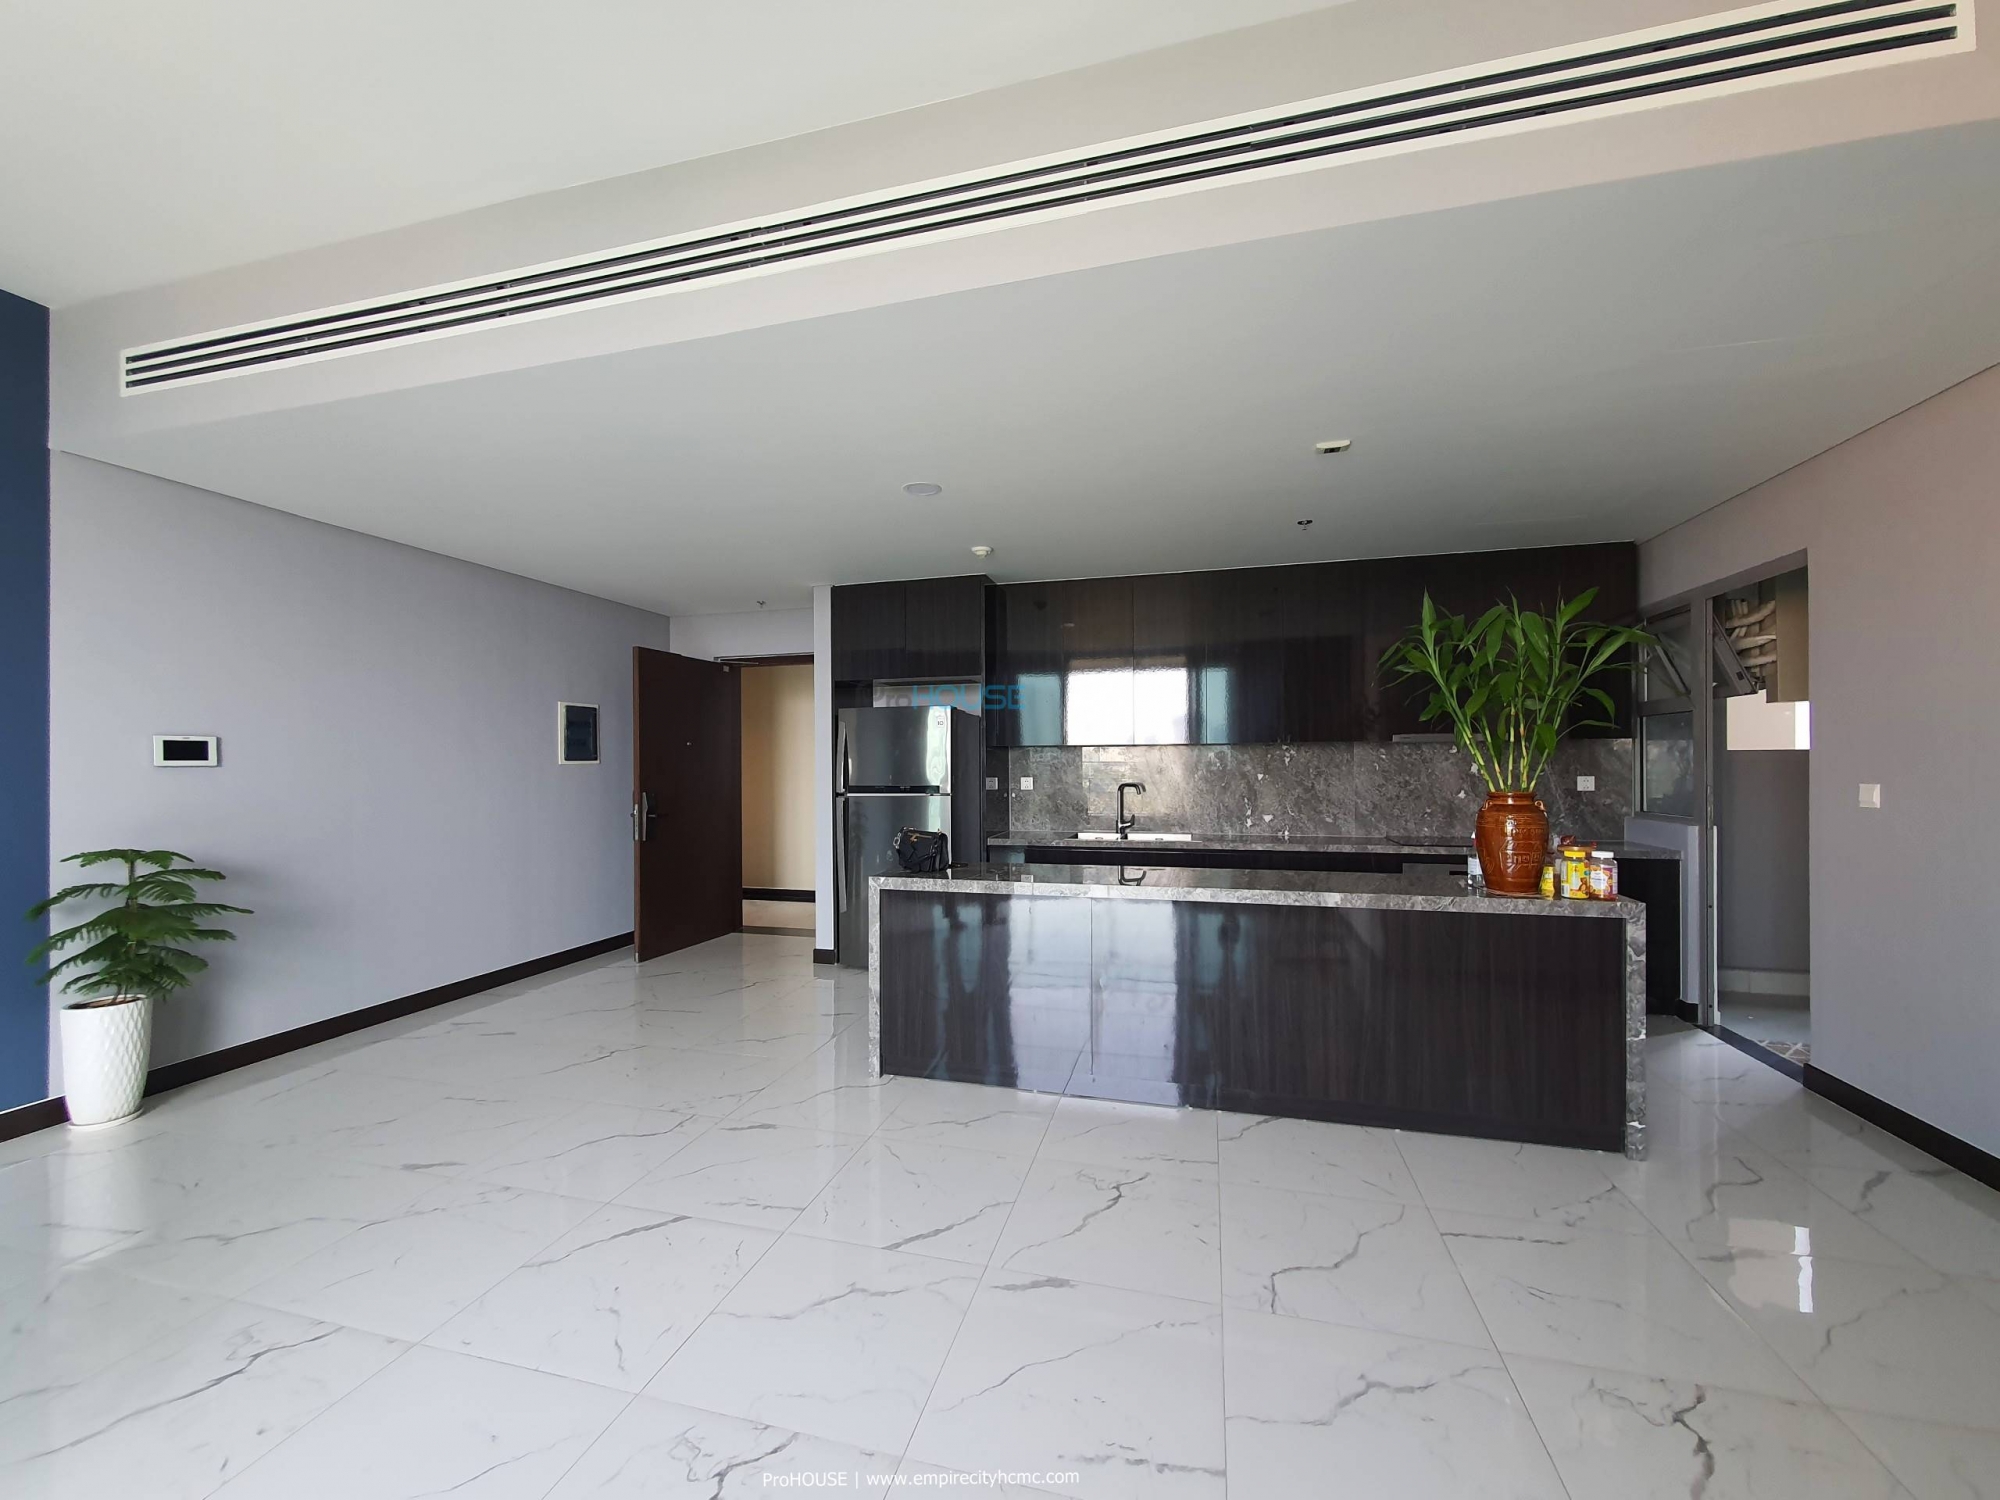 3 BEDROOM APARTMENT IN EMPIRE CITY FOR SALE WITH RIVER VIEW AND NICE LAYOUT